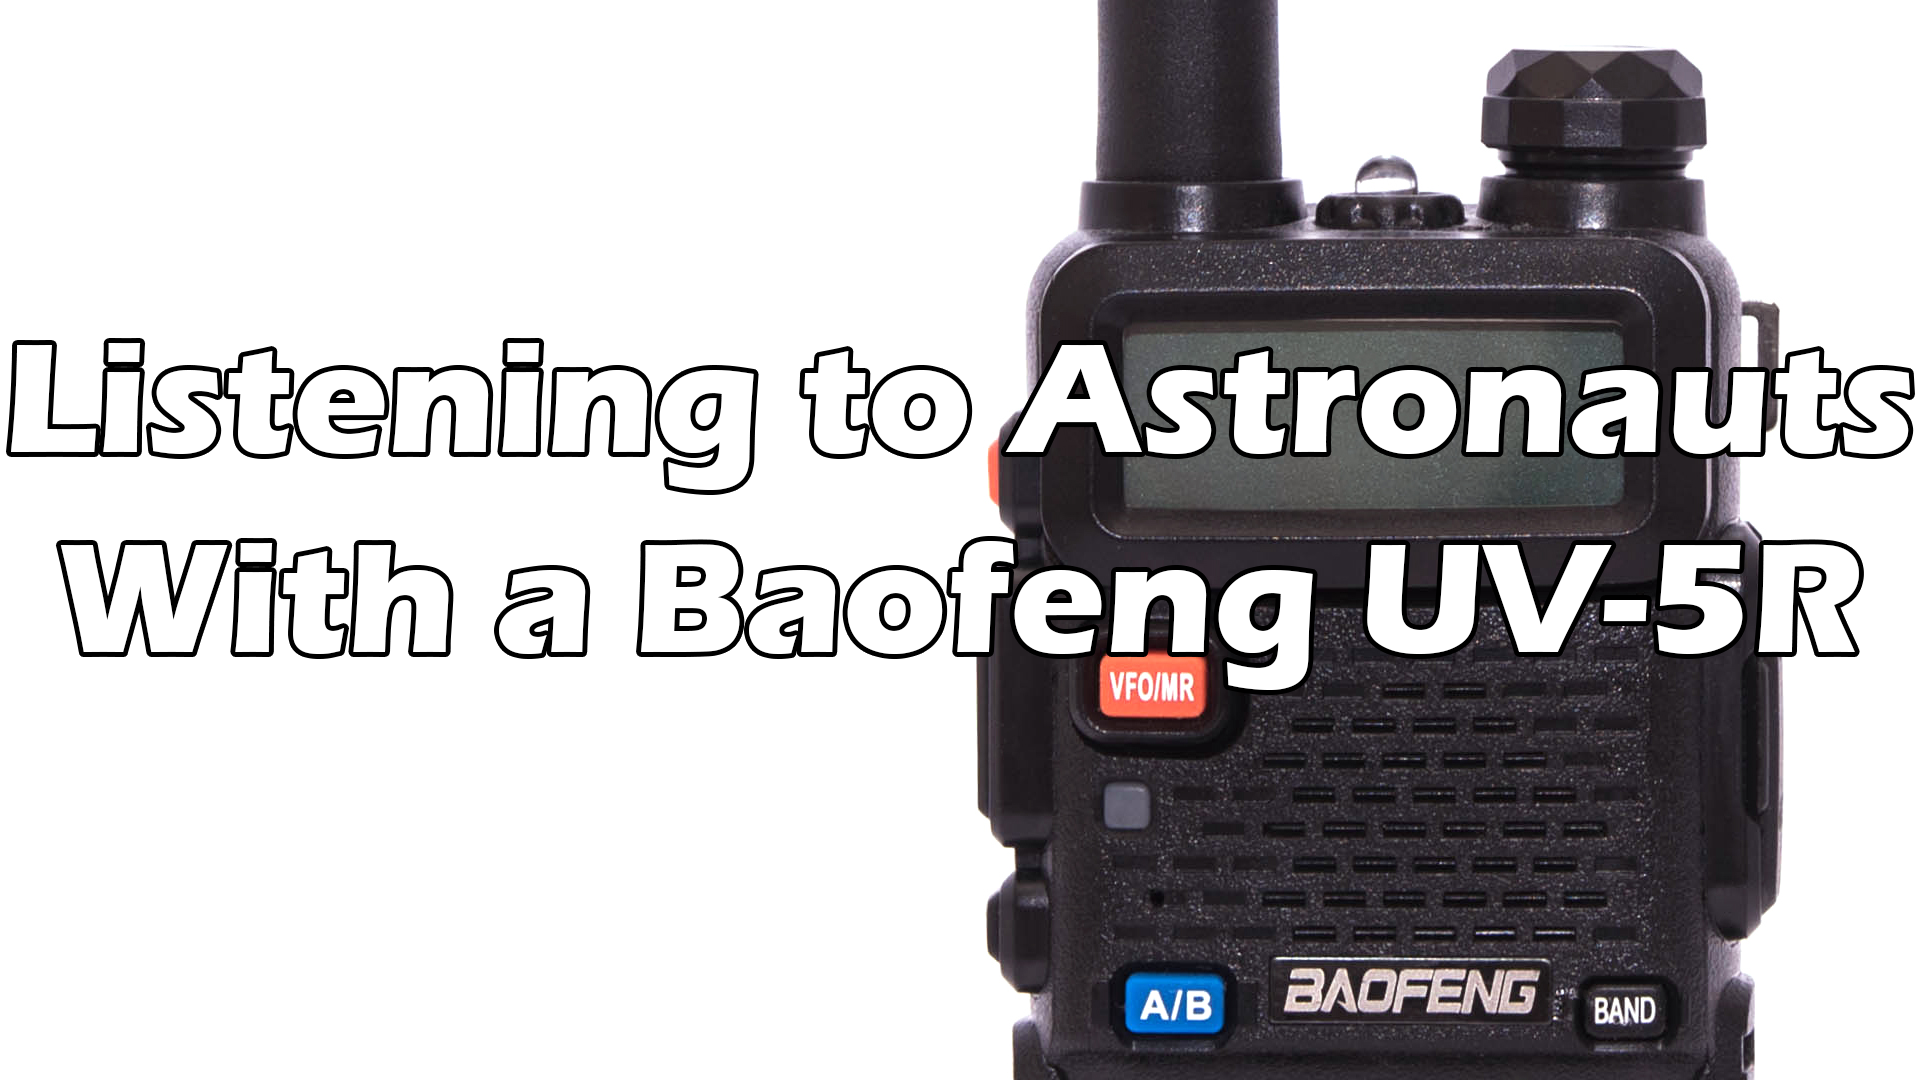 Listening to Astronauts ON THE ISS with a Baofeng UV-5R